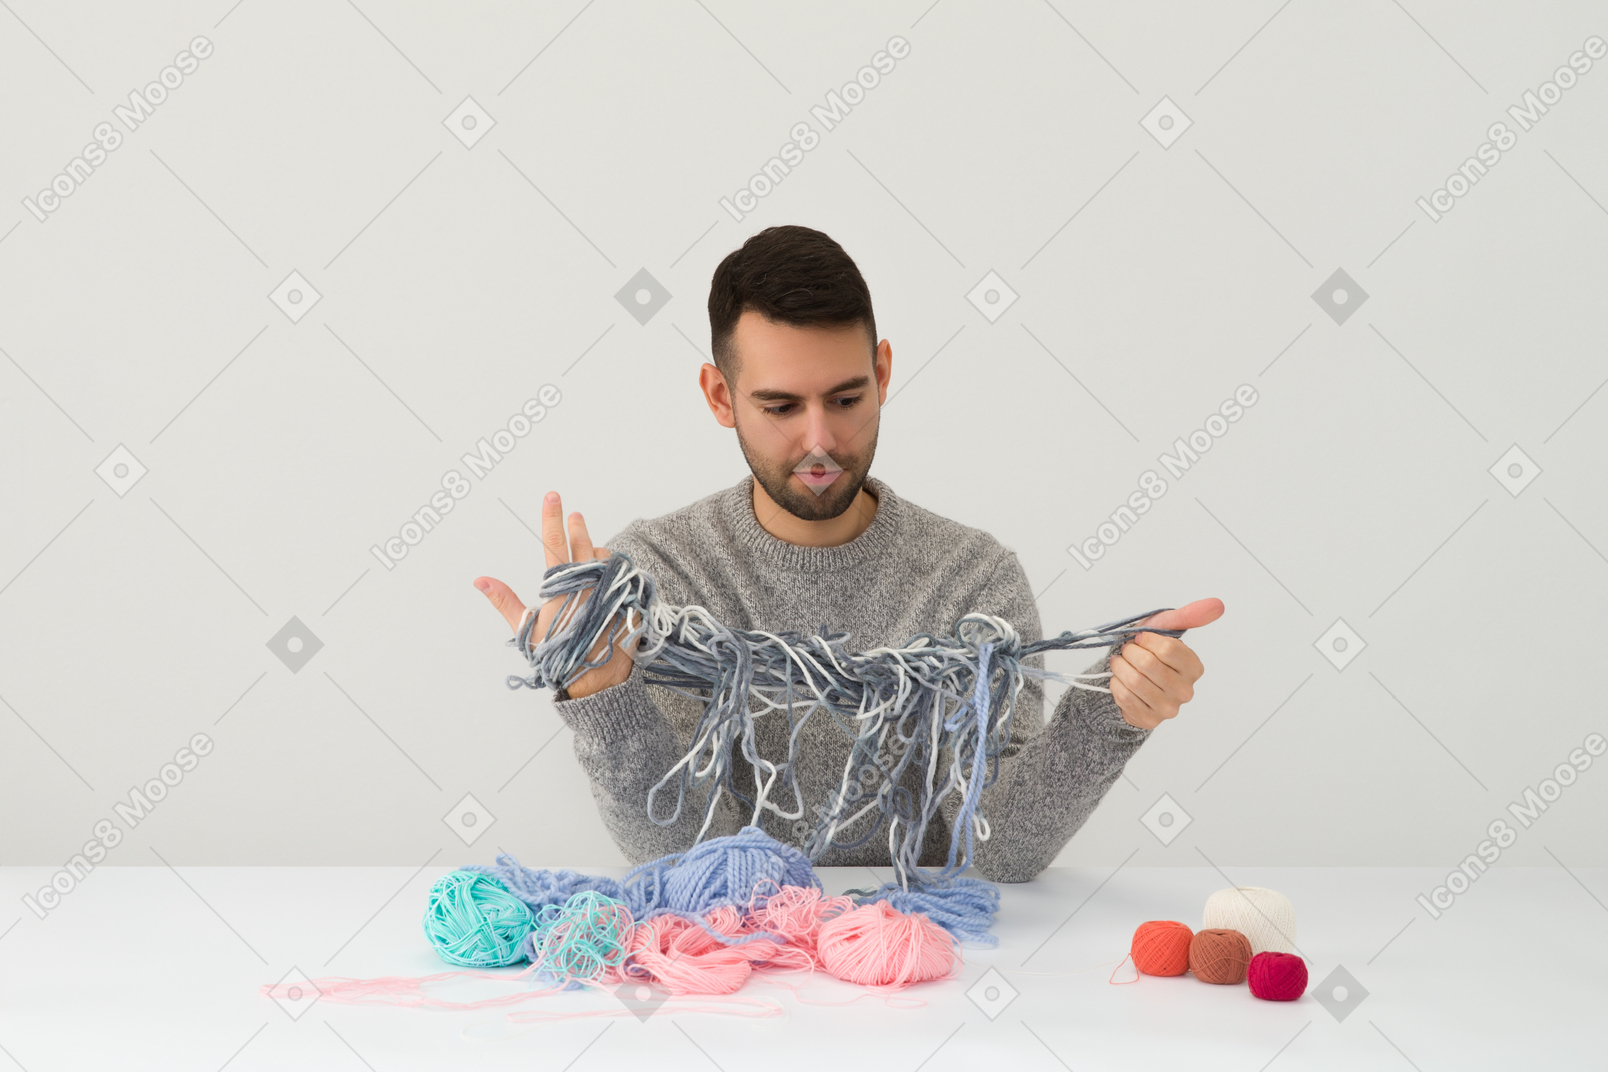 Get stuck in a tangled mess of yarn